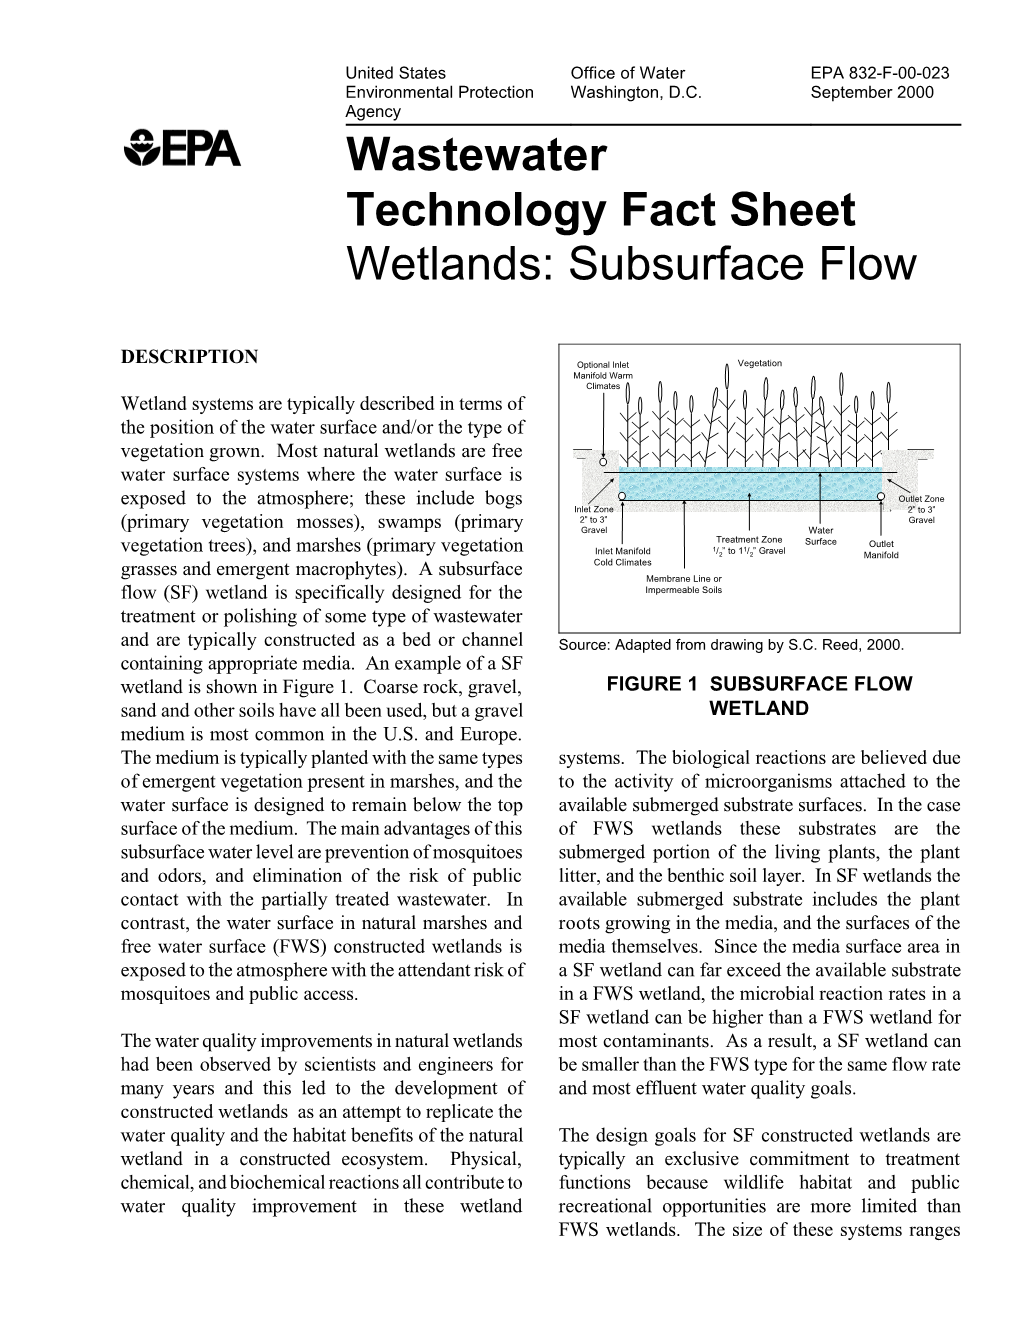 Wastewater Technology Fact Sheet Wetlands: Subsurface Flow